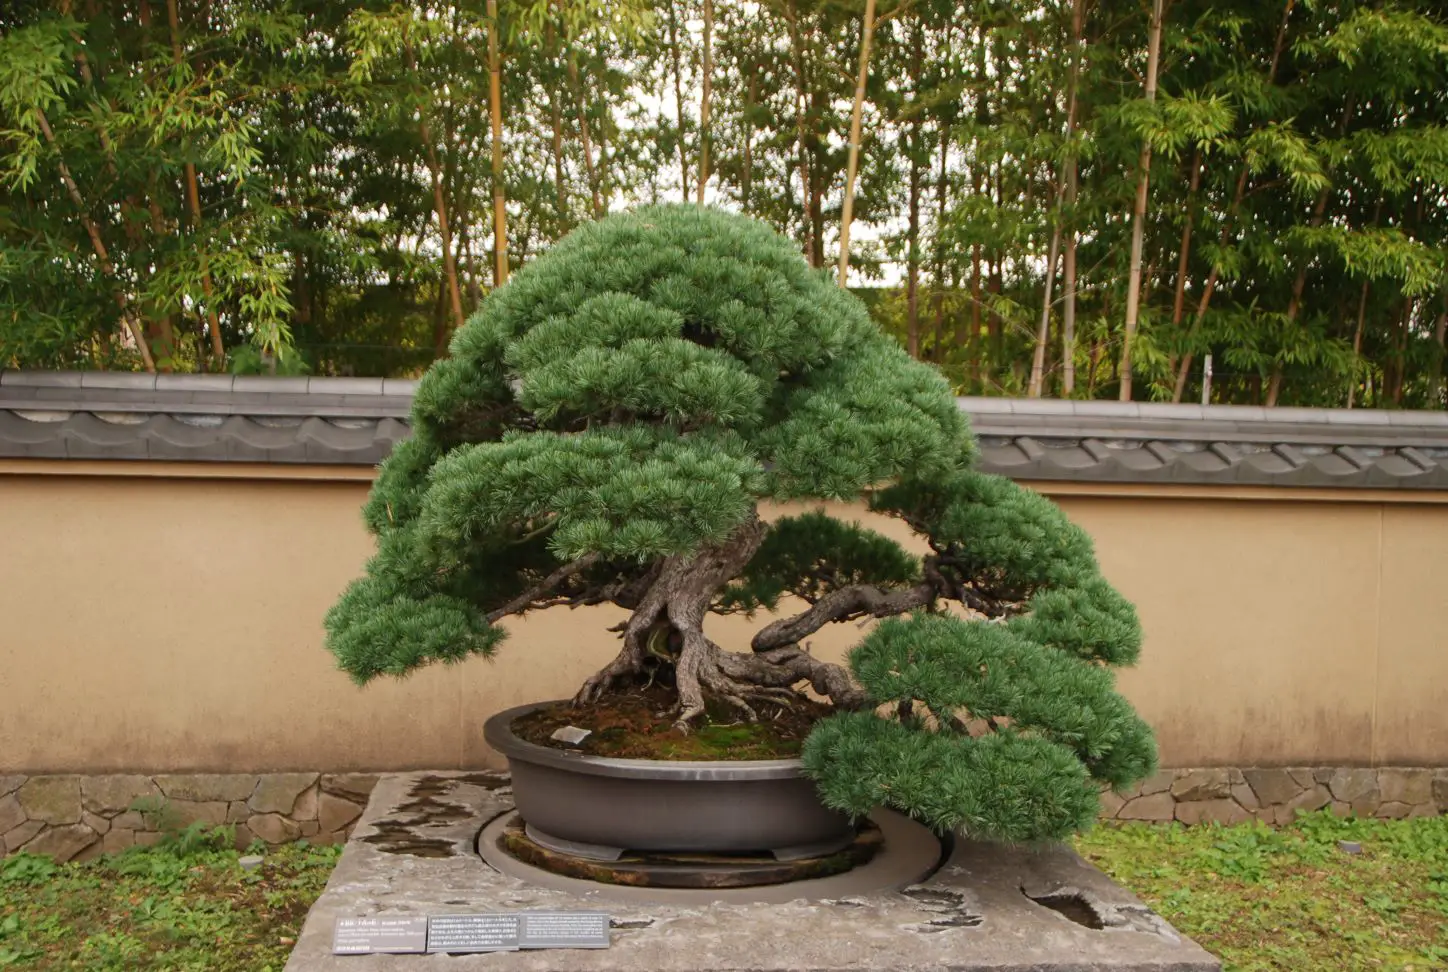 From Seedlings to Bonsai: Nurturing and Cultivating Pine Tree Bonsai